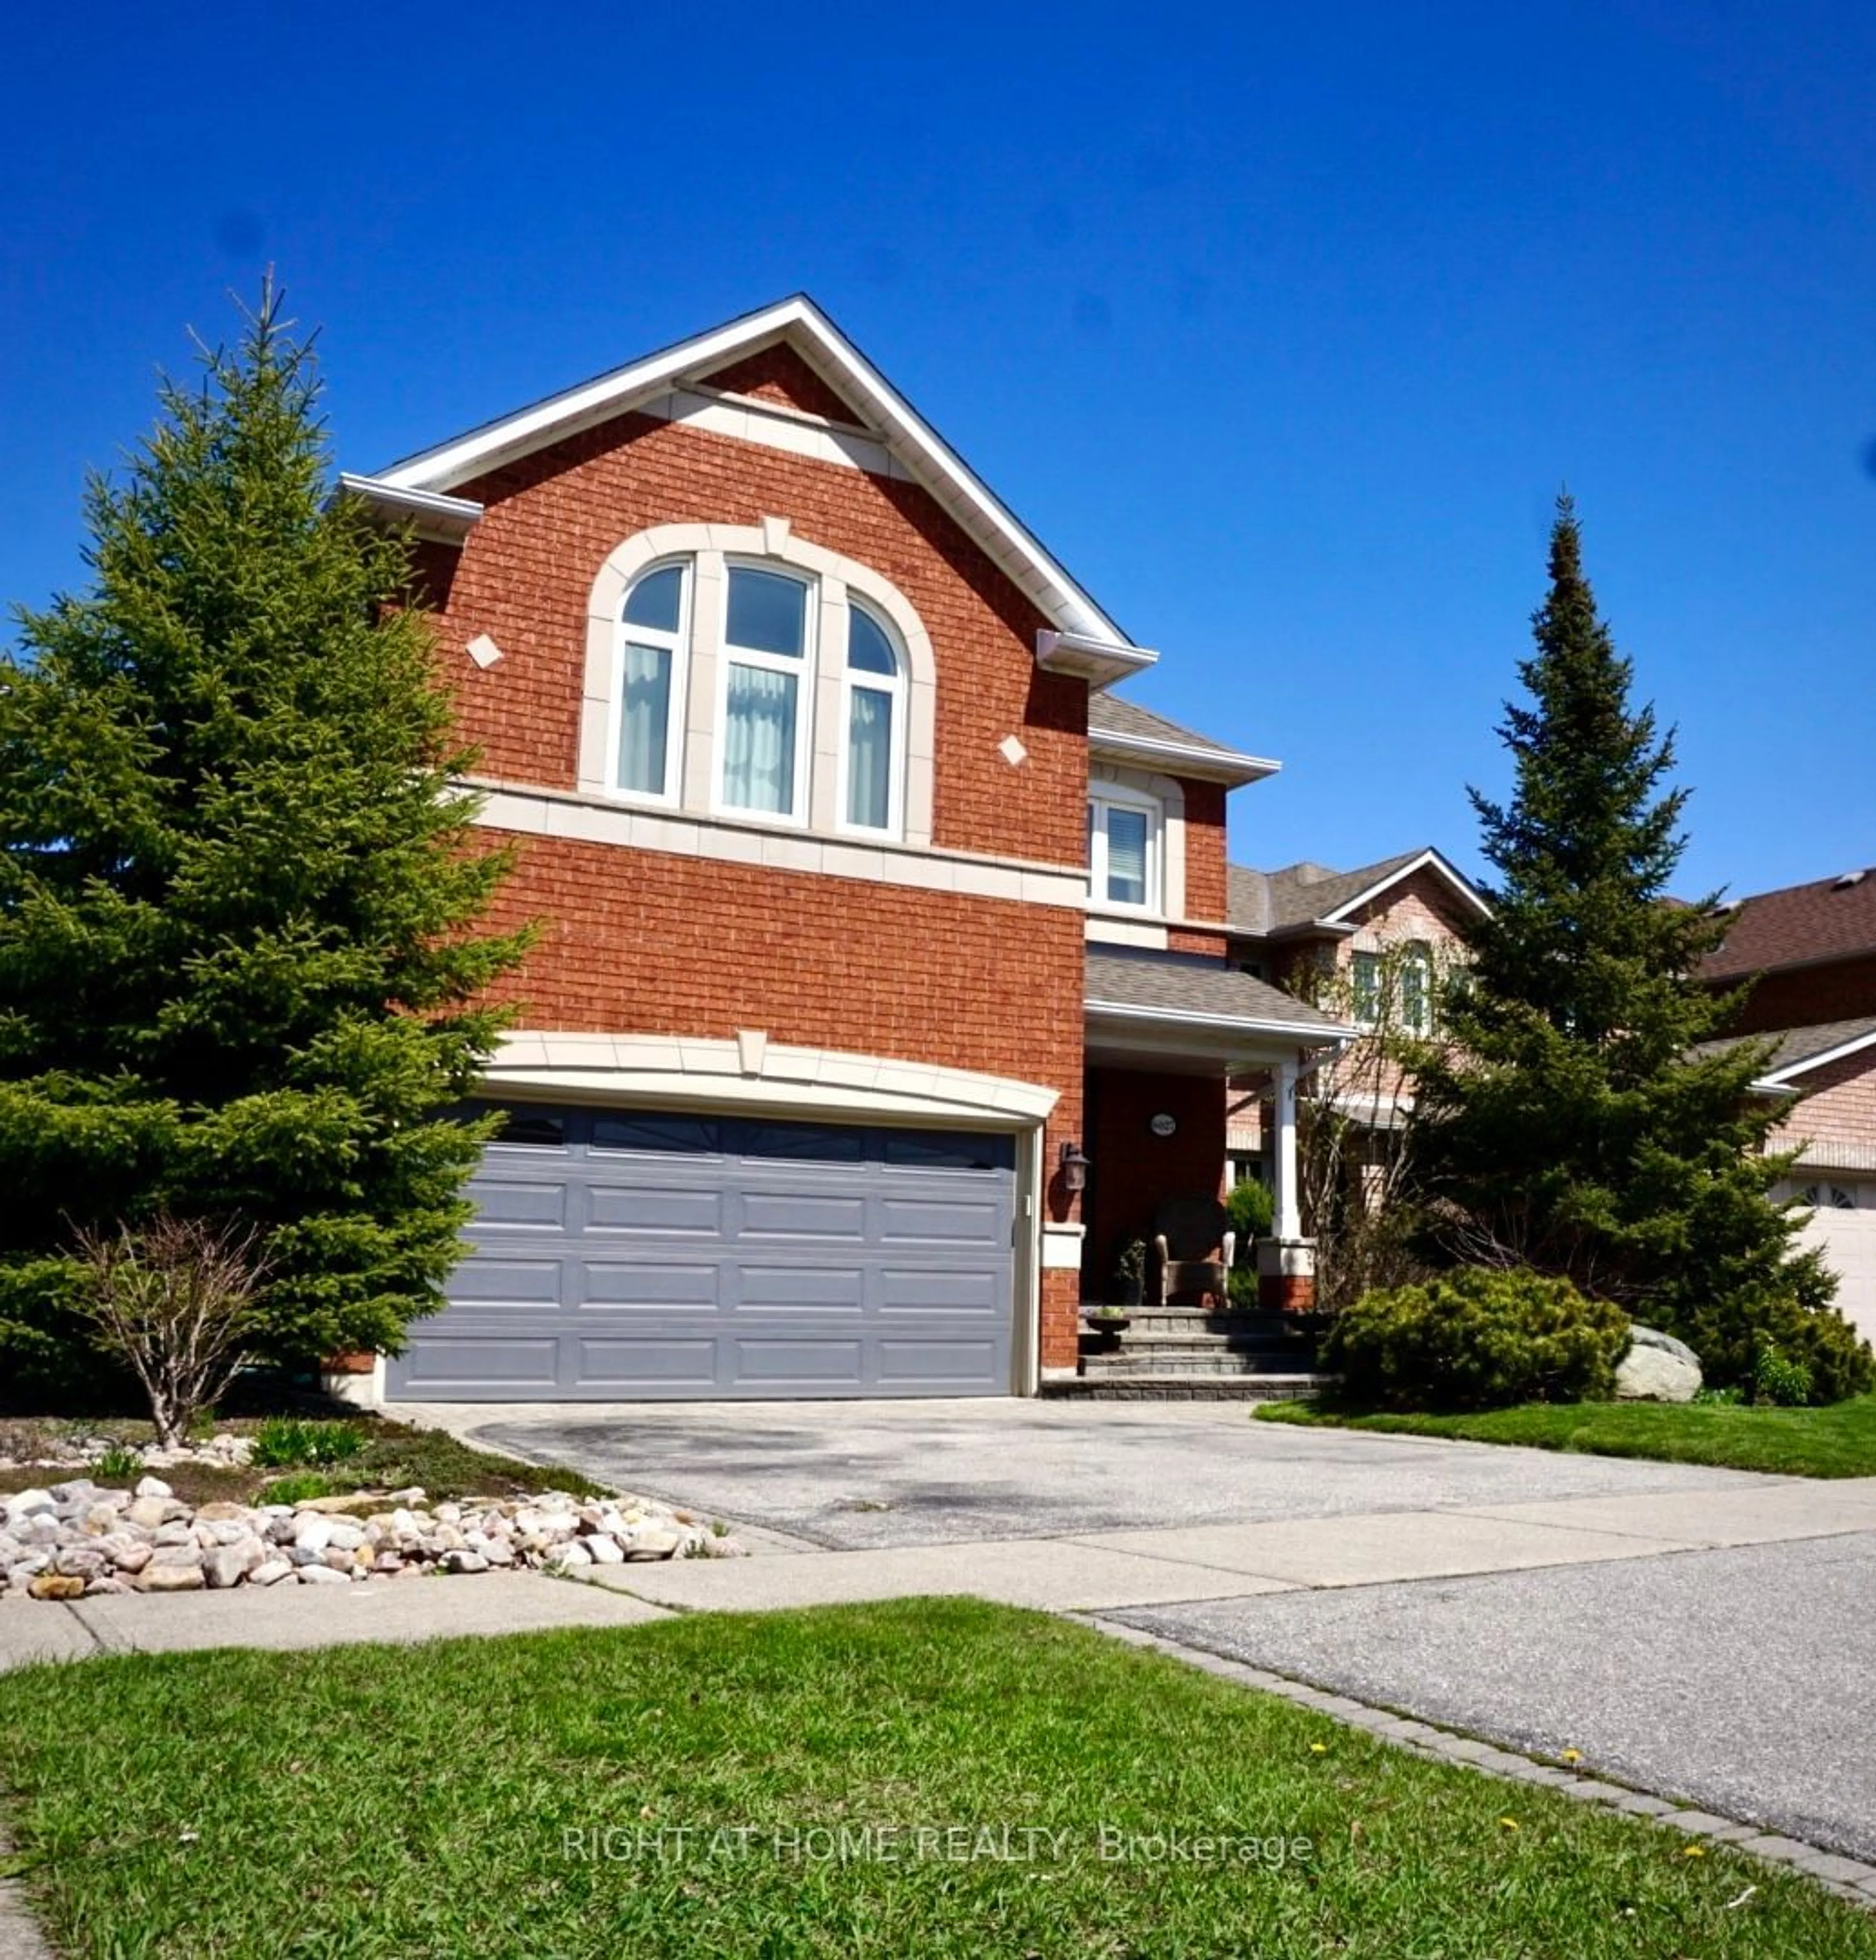 Home with brick exterior material for 6027 Maple Gate Circ, Mississauga Ontario L5N 7A7